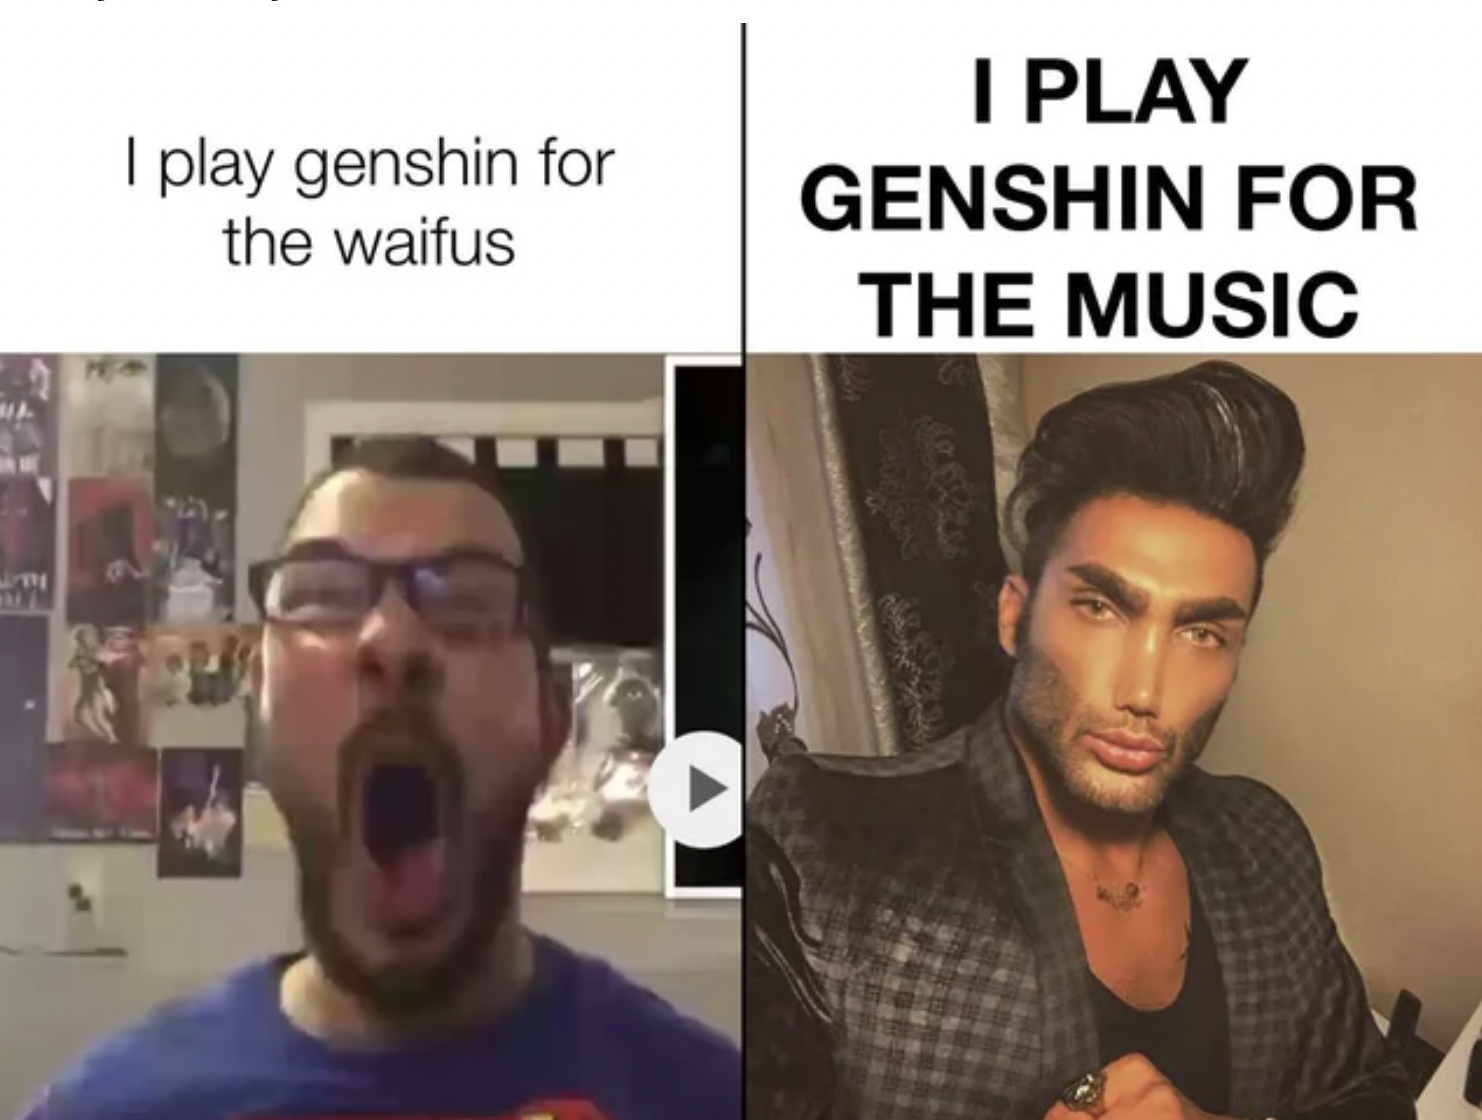 Gaming memes - hairstyle - Th I play genshin for the waifus I Play Genshin For The Music